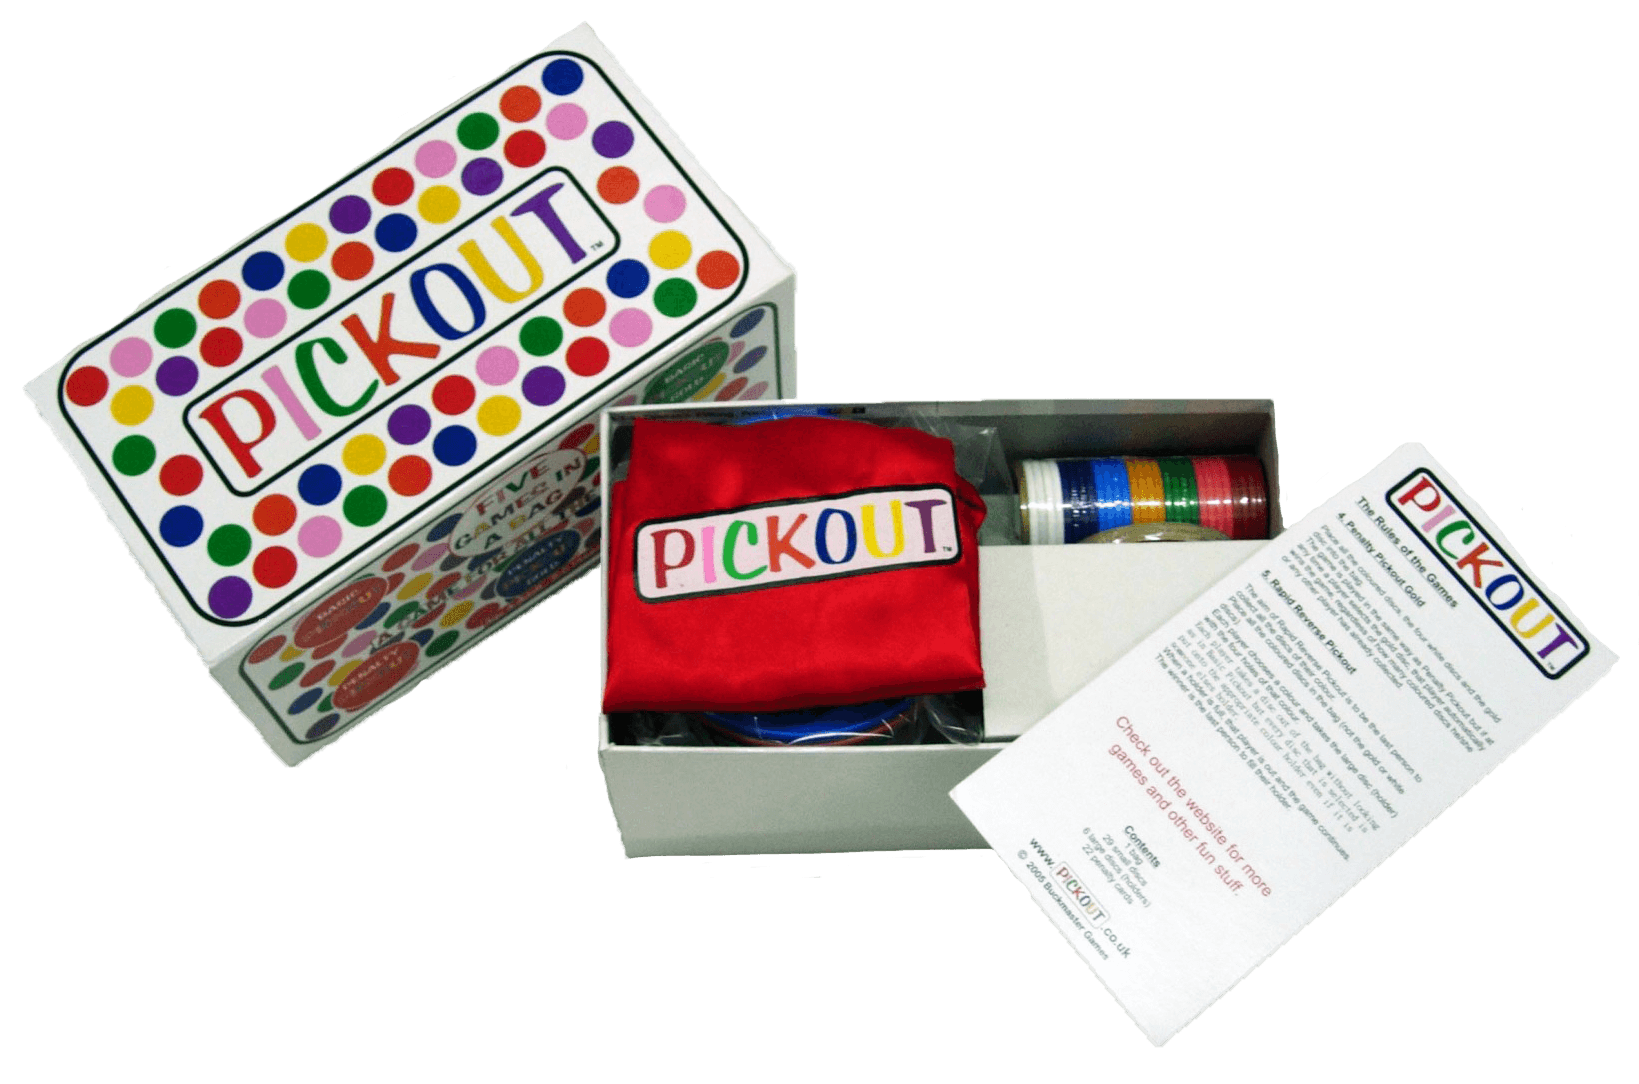 Boxed game of Pickout including bag, discs, instructions and holders.